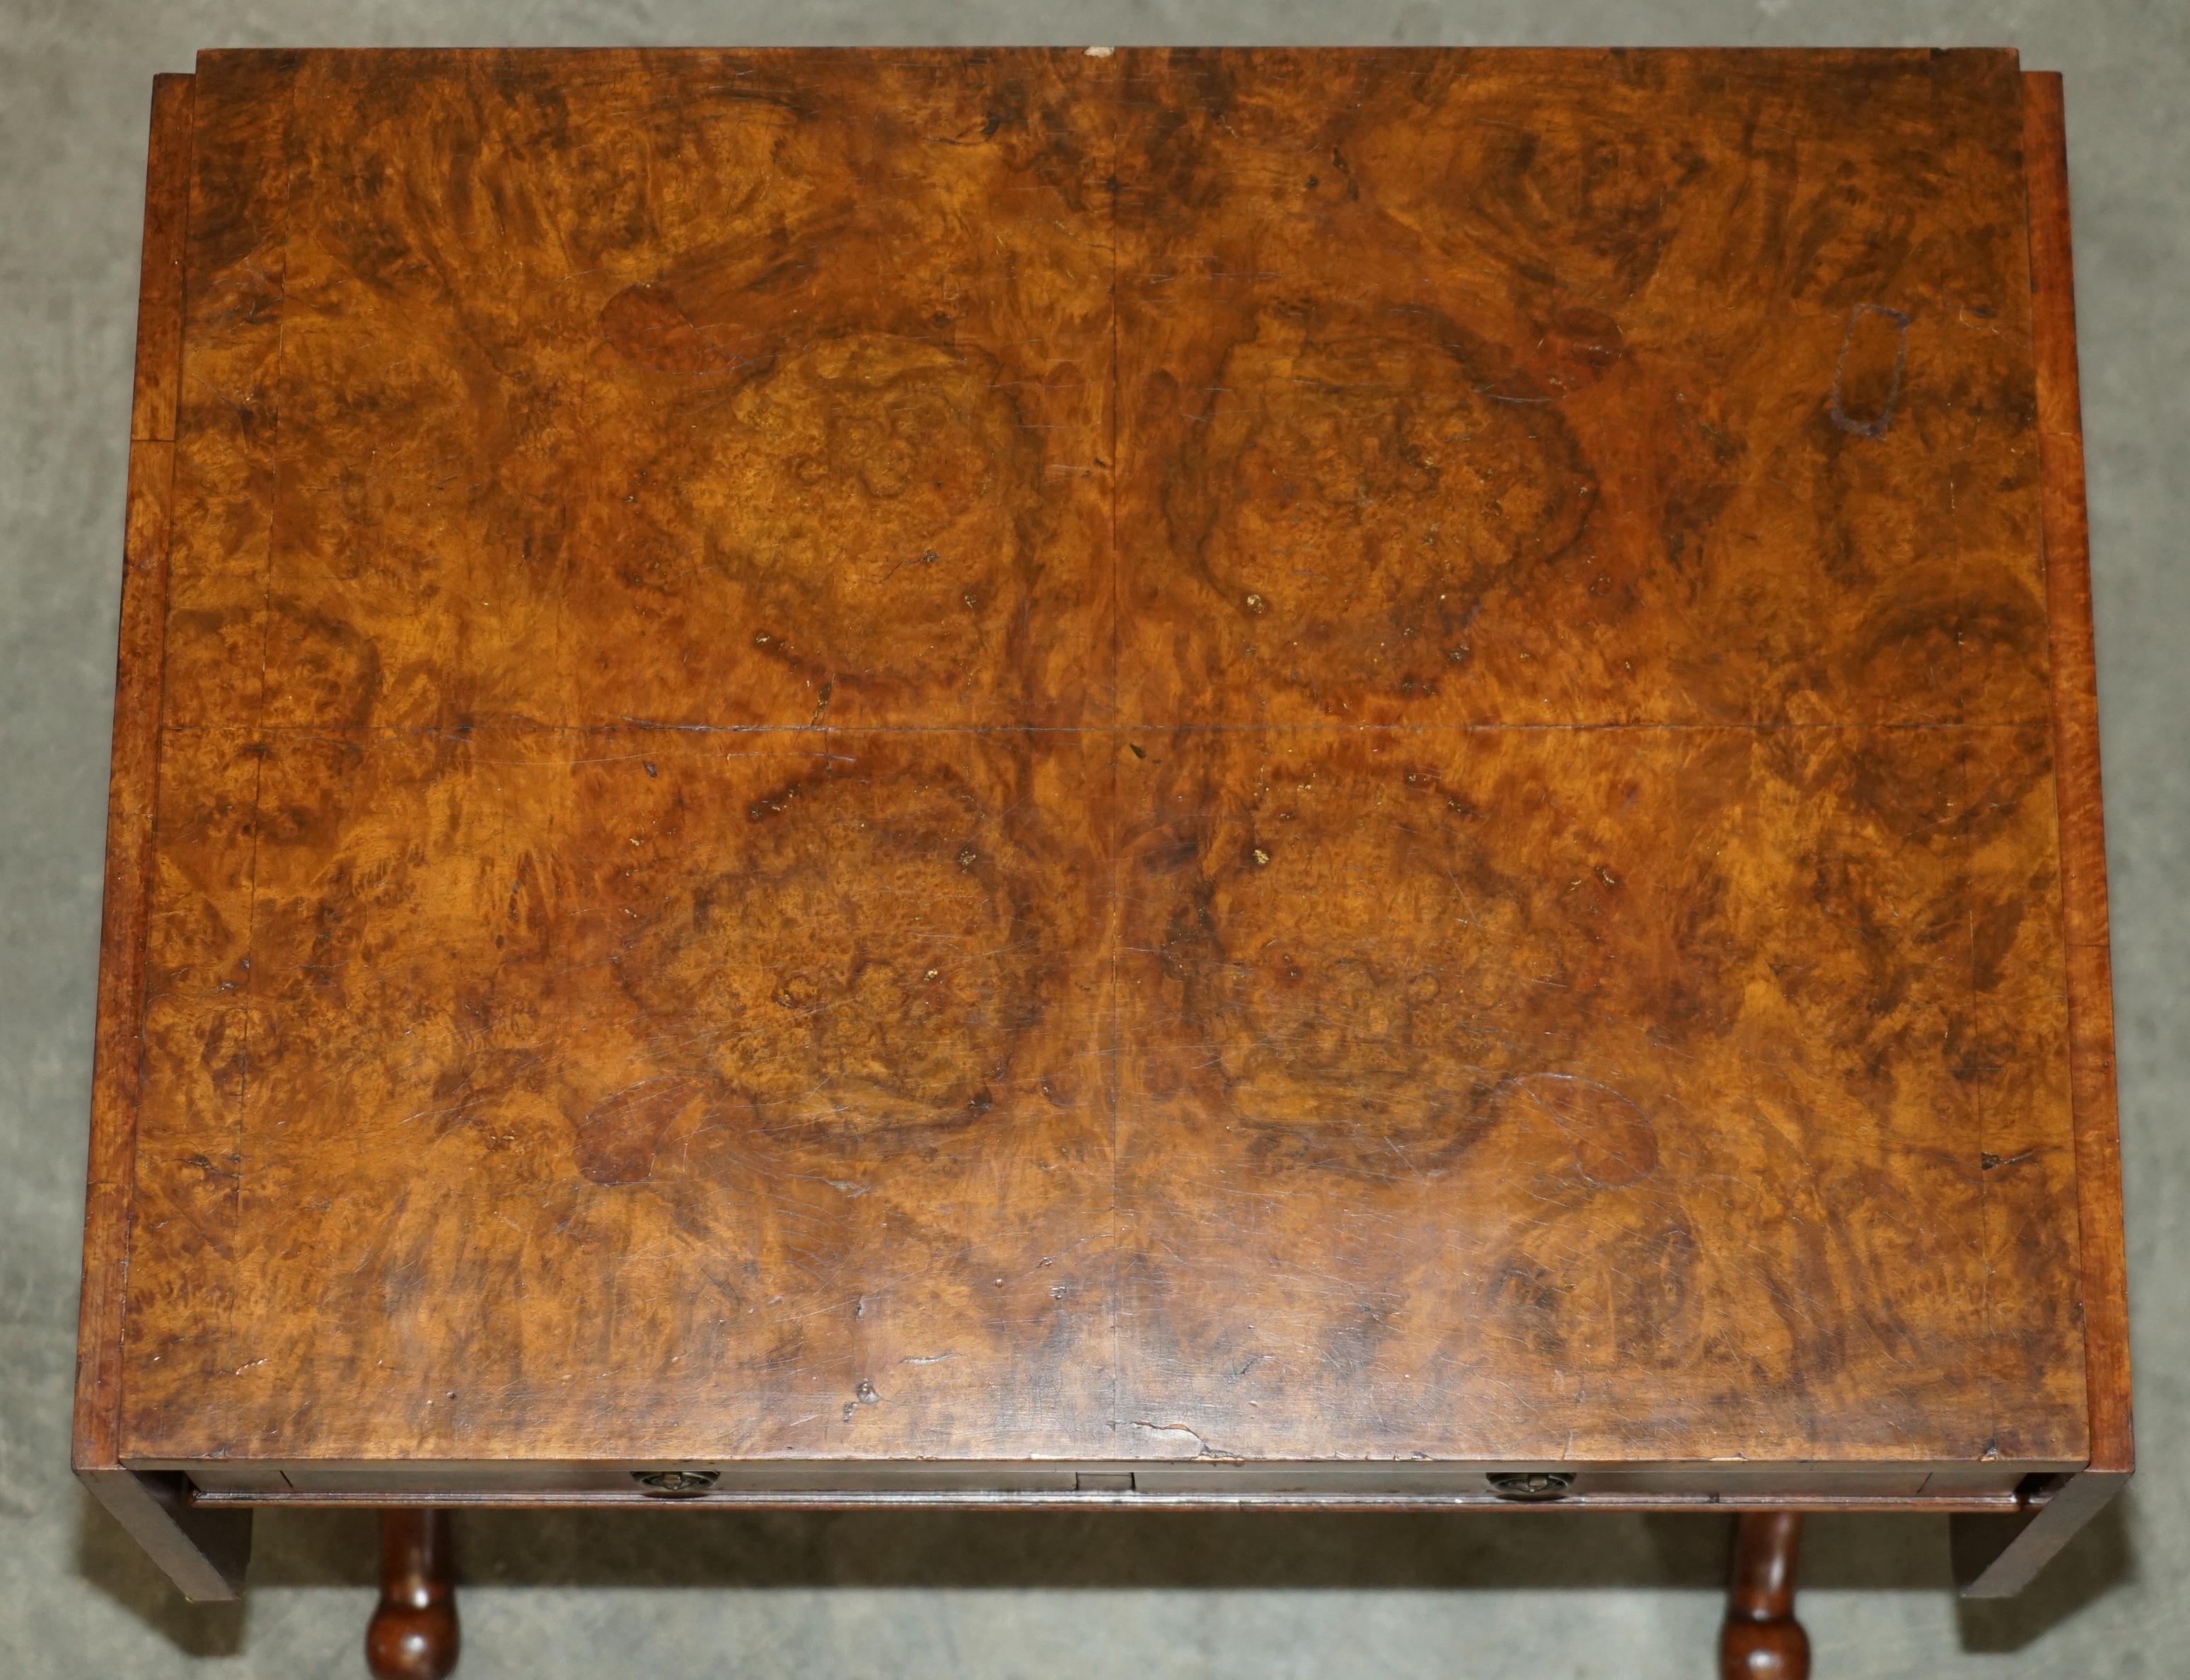 Late 19th Century ANTIQUE CIRCA 1880 EXTRA LARGE BURR WALNUT EXTENDING SOFA TABLE STUNNING PATiNA For Sale